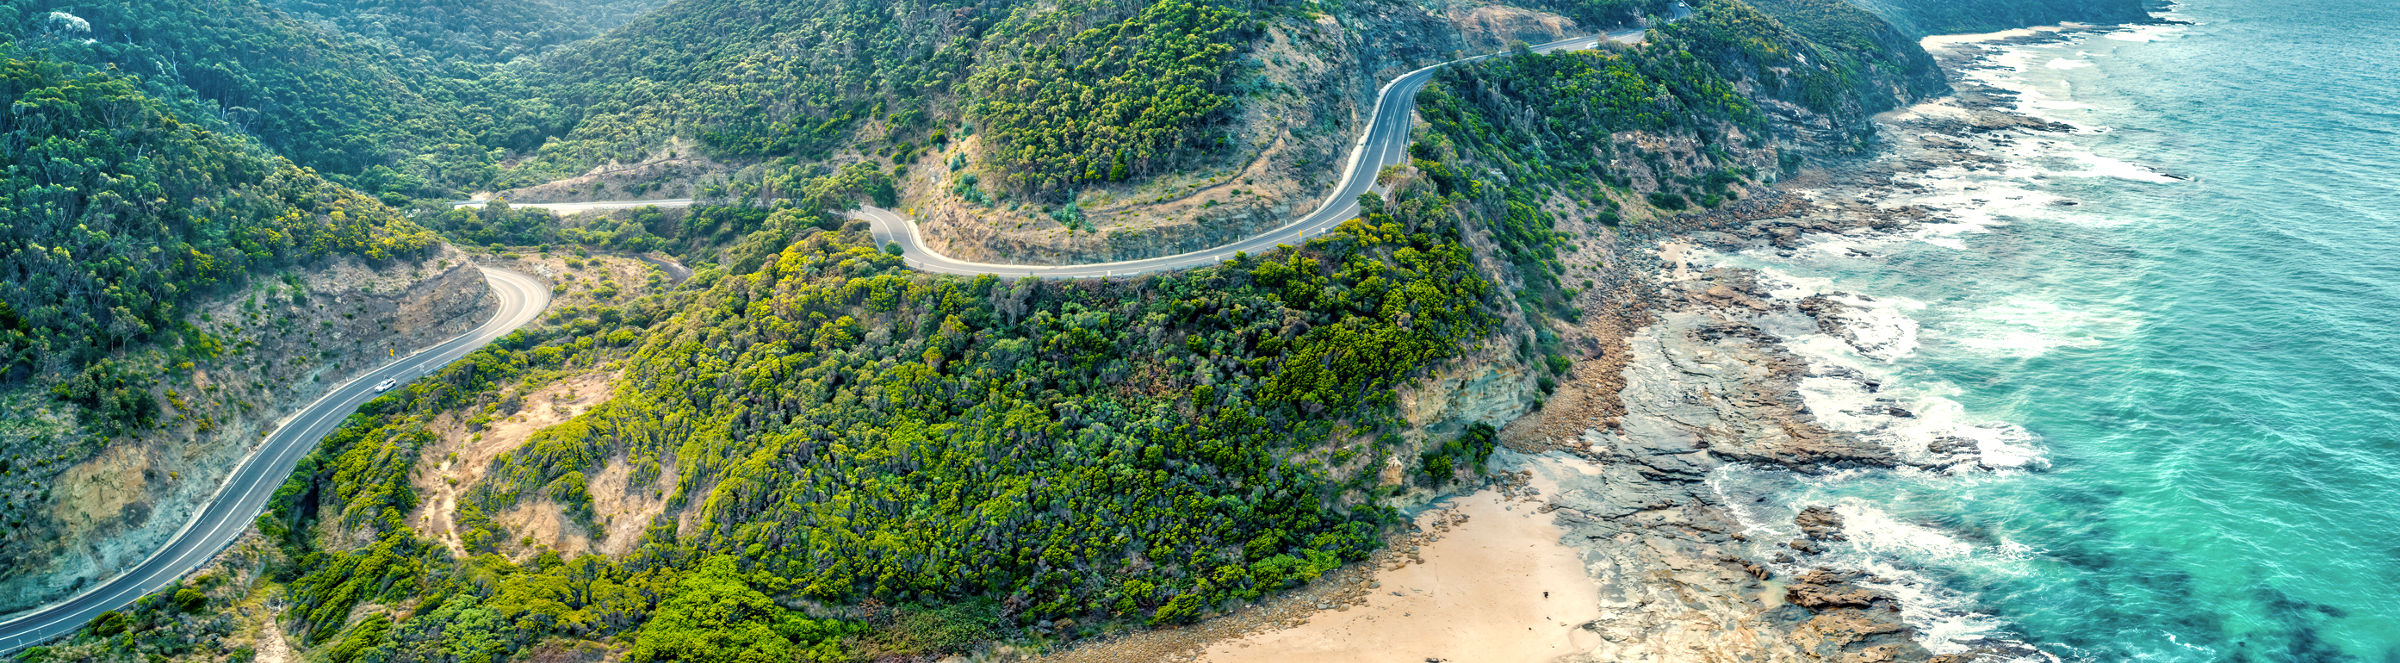 Bends of the famous Great Ocean Road